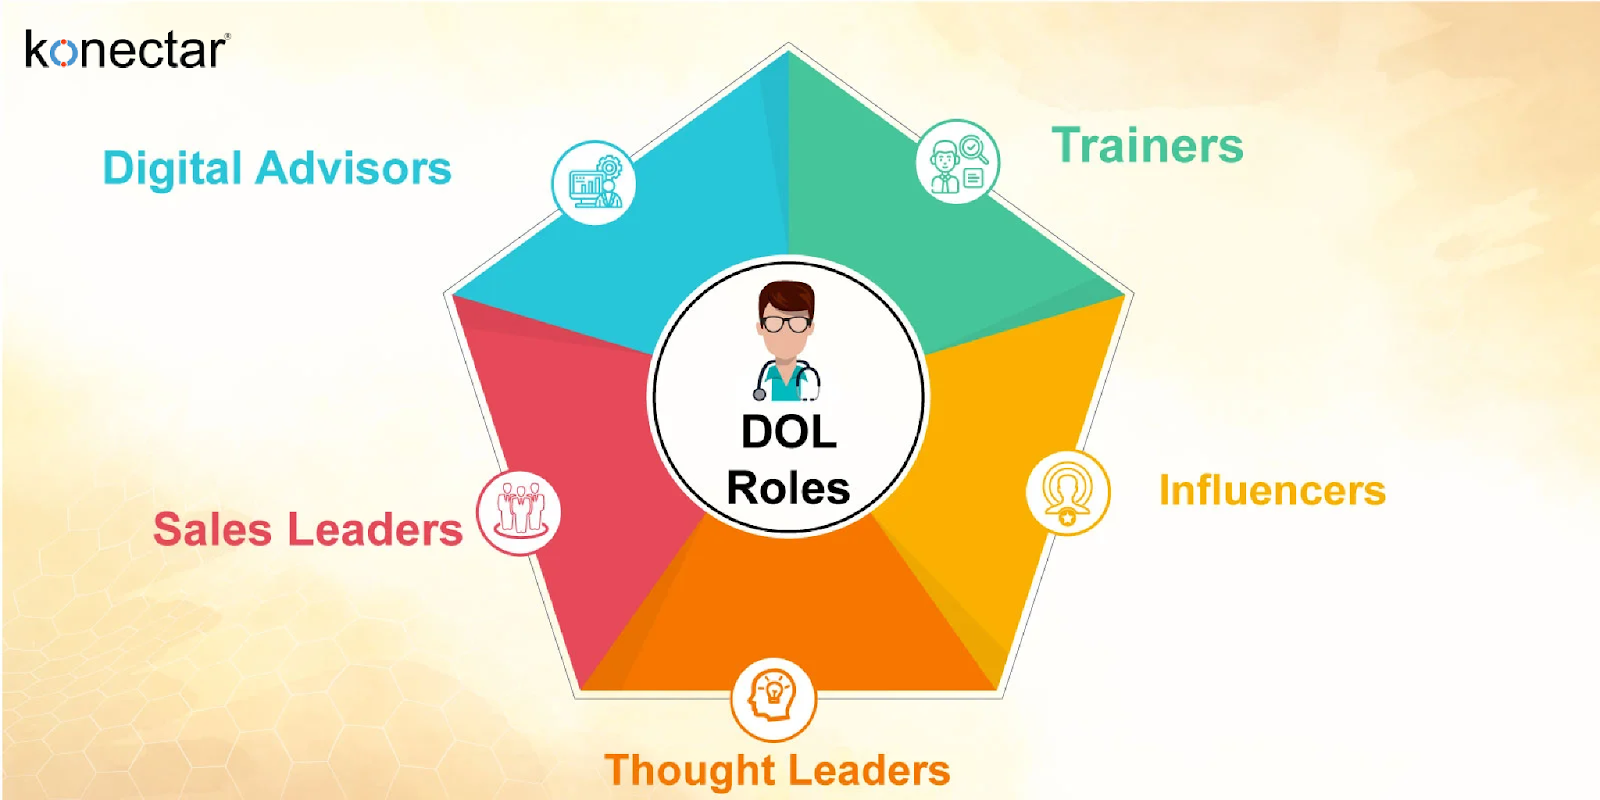 DOLs can play various roles in a life sciences company